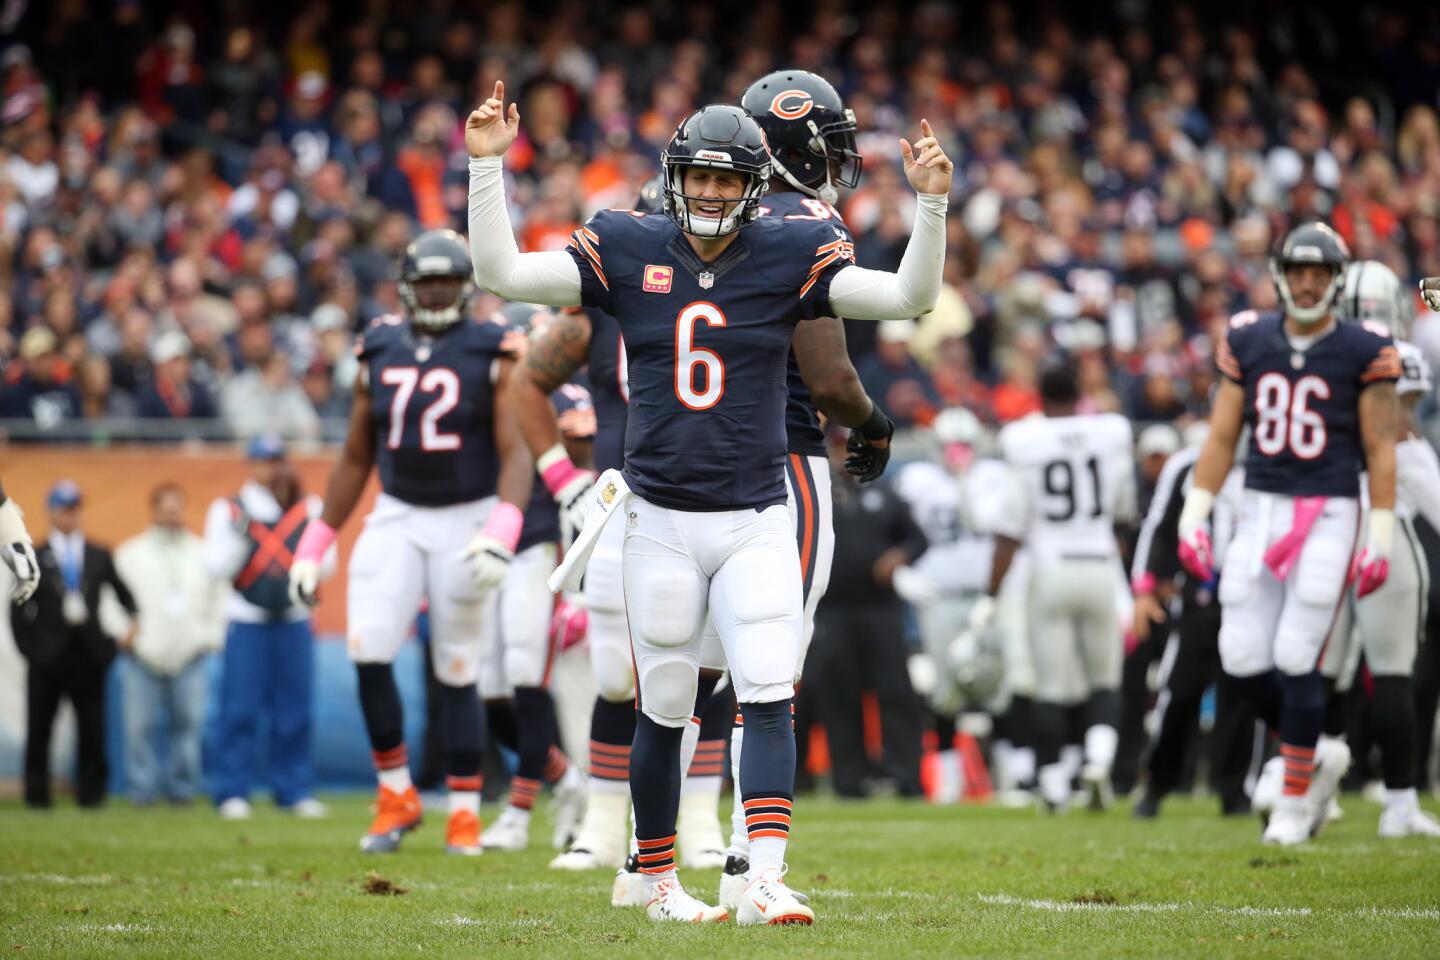 Jay Cutler can't believe the call after he was sacked in the second quarter against the Raiders.